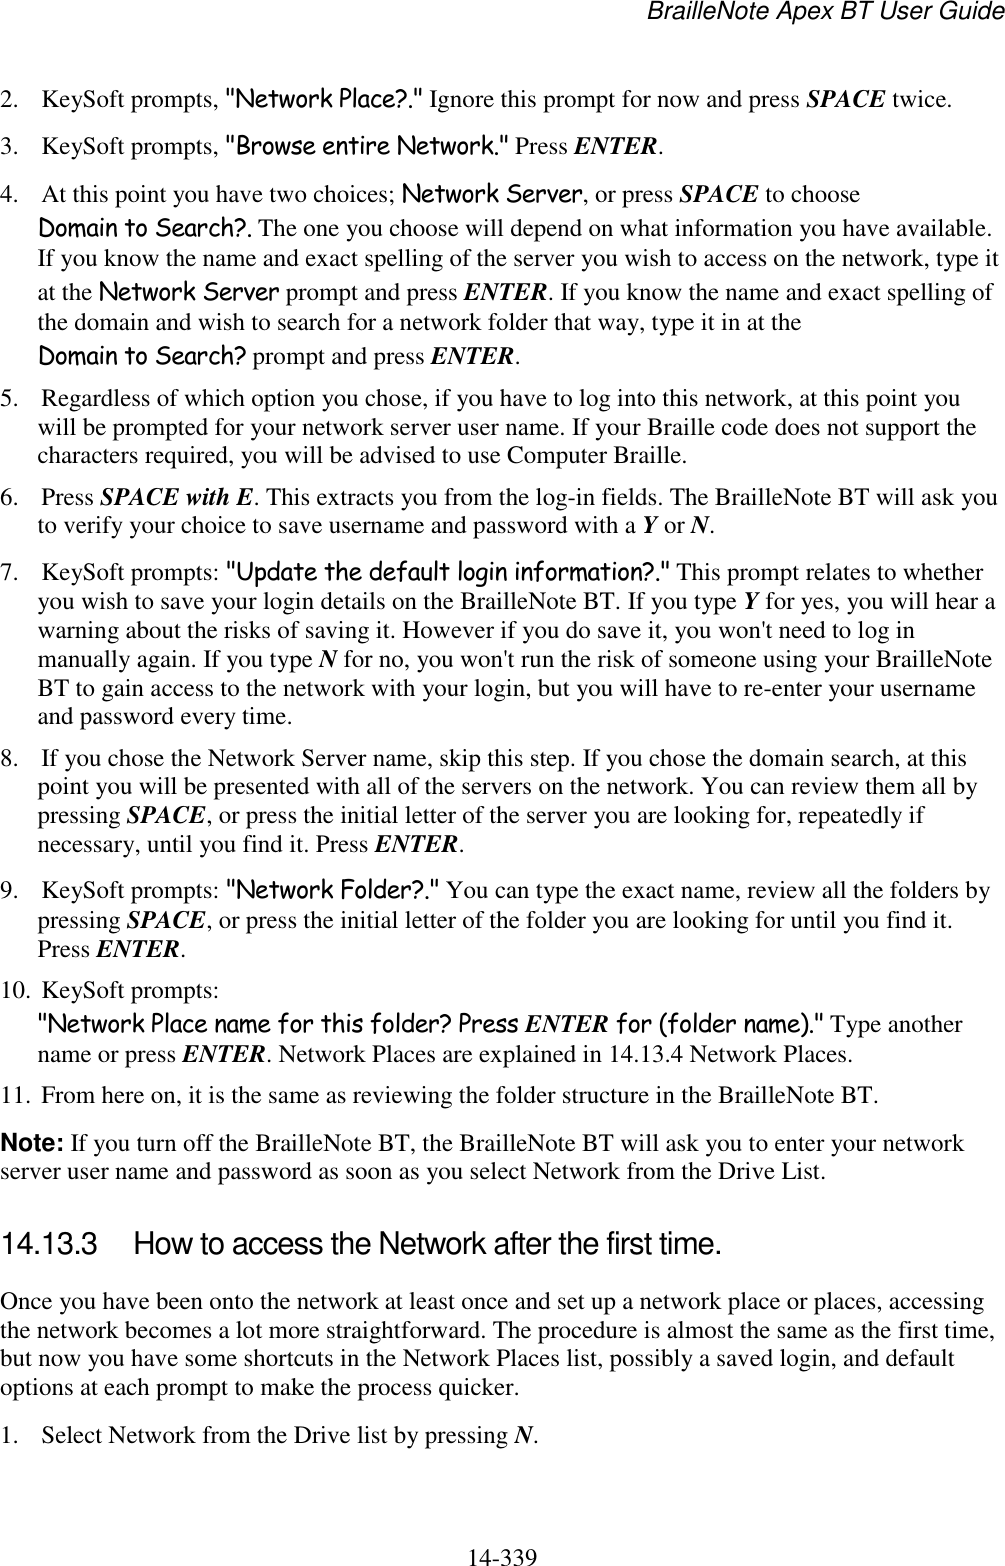 BrailleNote Apex BT User Guide   14-339   2. KeySoft prompts, &quot;Network Place?.&quot; Ignore this prompt for now and press SPACE twice.  3. KeySoft prompts, &quot;Browse entire Network.&quot; Press ENTER.  4. At this point you have two choices; Network Server, or press SPACE to choose Domain to Search?. The one you choose will depend on what information you have available. If you know the name and exact spelling of the server you wish to access on the network, type it at the Network Server prompt and press ENTER. If you know the name and exact spelling of the domain and wish to search for a network folder that way, type it in at the Domain to Search? prompt and press ENTER.  5. Regardless of which option you chose, if you have to log into this network, at this point you will be prompted for your network server user name. If your Braille code does not support the characters required, you will be advised to use Computer Braille.  6. Press SPACE with E. This extracts you from the log-in fields. The BrailleNote BT will ask you to verify your choice to save username and password with a Y or N. 7. KeySoft prompts: &quot;Update the default login information?.&quot; This prompt relates to whether you wish to save your login details on the BrailleNote BT. If you type Y for yes, you will hear a warning about the risks of saving it. However if you do save it, you won&apos;t need to log in manually again. If you type N for no, you won&apos;t run the risk of someone using your BrailleNote BT to gain access to the network with your login, but you will have to re-enter your username and password every time. 8. If you chose the Network Server name, skip this step. If you chose the domain search, at this point you will be presented with all of the servers on the network. You can review them all by pressing SPACE, or press the initial letter of the server you are looking for, repeatedly if necessary, until you find it. Press ENTER. 9. KeySoft prompts: &quot;Network Folder?.&quot; You can type the exact name, review all the folders by pressing SPACE, or press the initial letter of the folder you are looking for until you find it. Press ENTER. 10. KeySoft prompts: &quot;Network Place name for this folder? Press ENTER for (folder name).&quot; Type another name or press ENTER. Network Places are explained in 14.13.4 Network Places. 11. From here on, it is the same as reviewing the folder structure in the BrailleNote BT. Note: If you turn off the BrailleNote BT, the BrailleNote BT will ask you to enter your network server user name and password as soon as you select Network from the Drive List.   14.13.3  How to access the Network after the first time. Once you have been onto the network at least once and set up a network place or places, accessing the network becomes a lot more straightforward. The procedure is almost the same as the first time, but now you have some shortcuts in the Network Places list, possibly a saved login, and default options at each prompt to make the process quicker. 1. Select Network from the Drive list by pressing N. 